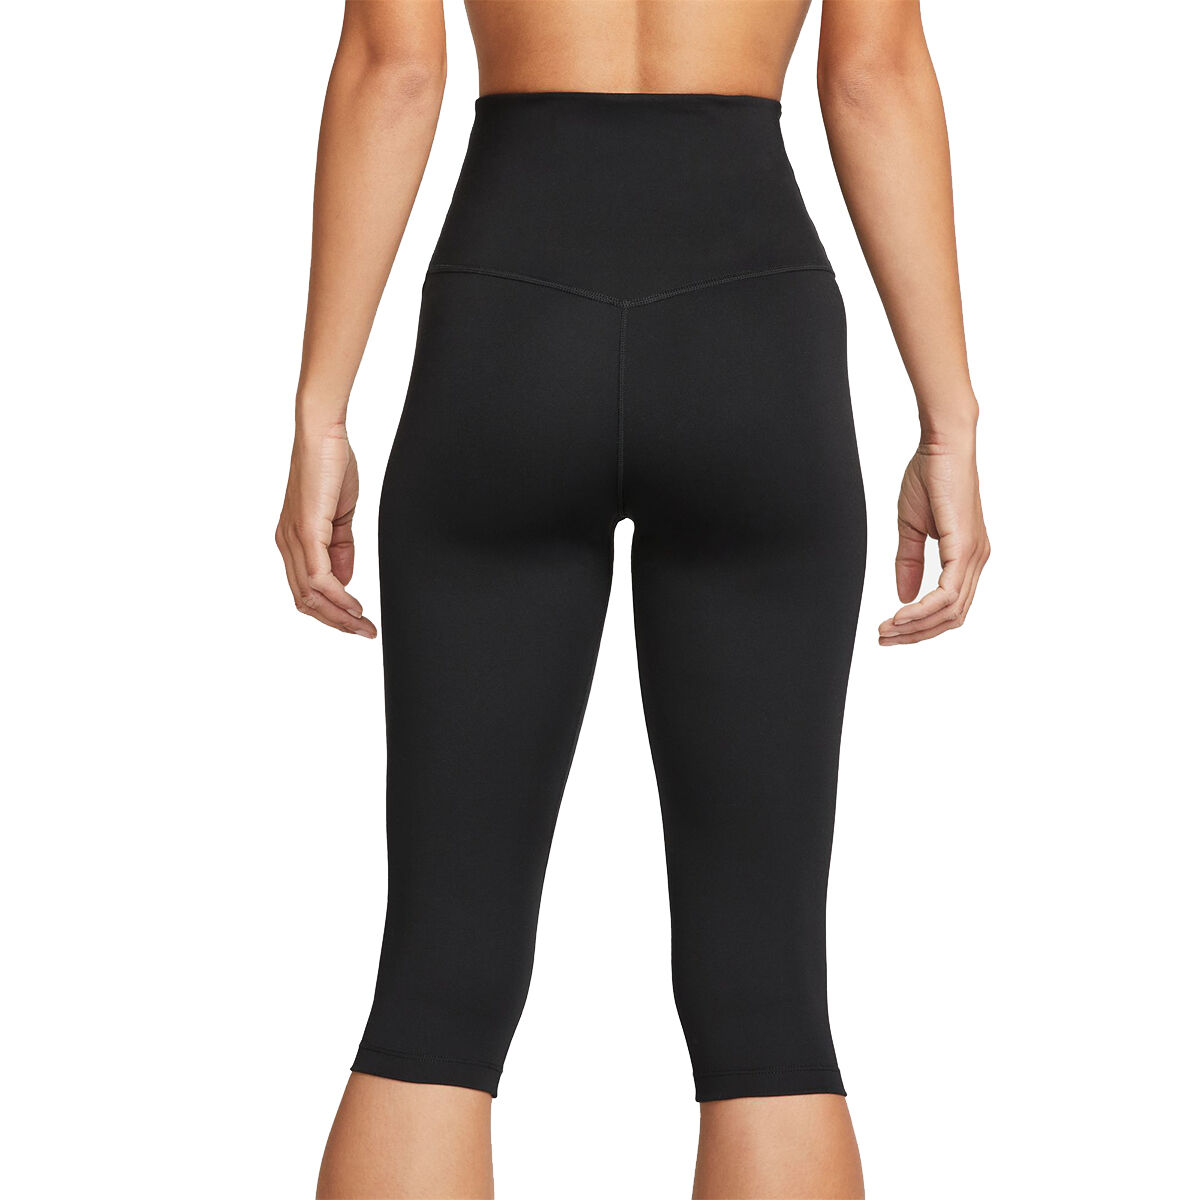 Nike One Womens High Waisted Tights Rose XS